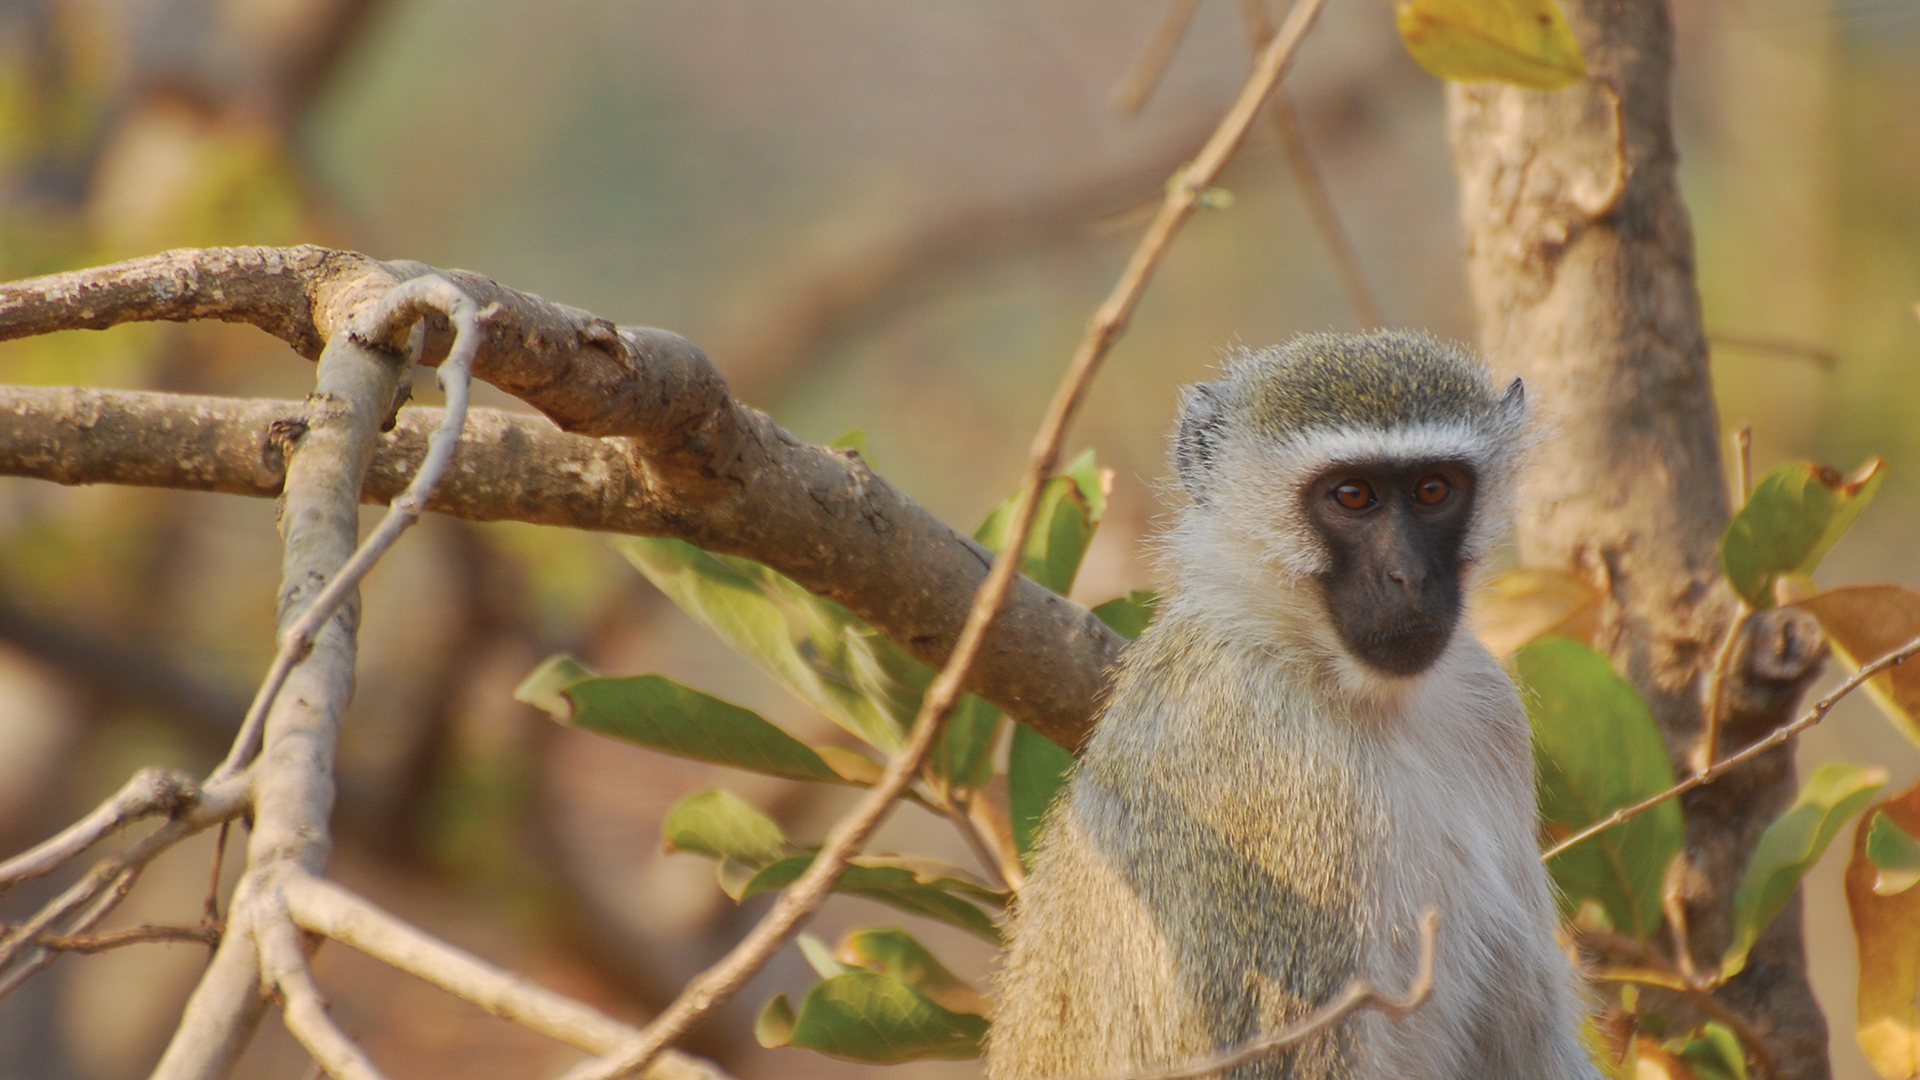 A vervet monkey is sitting in the branches of a tree